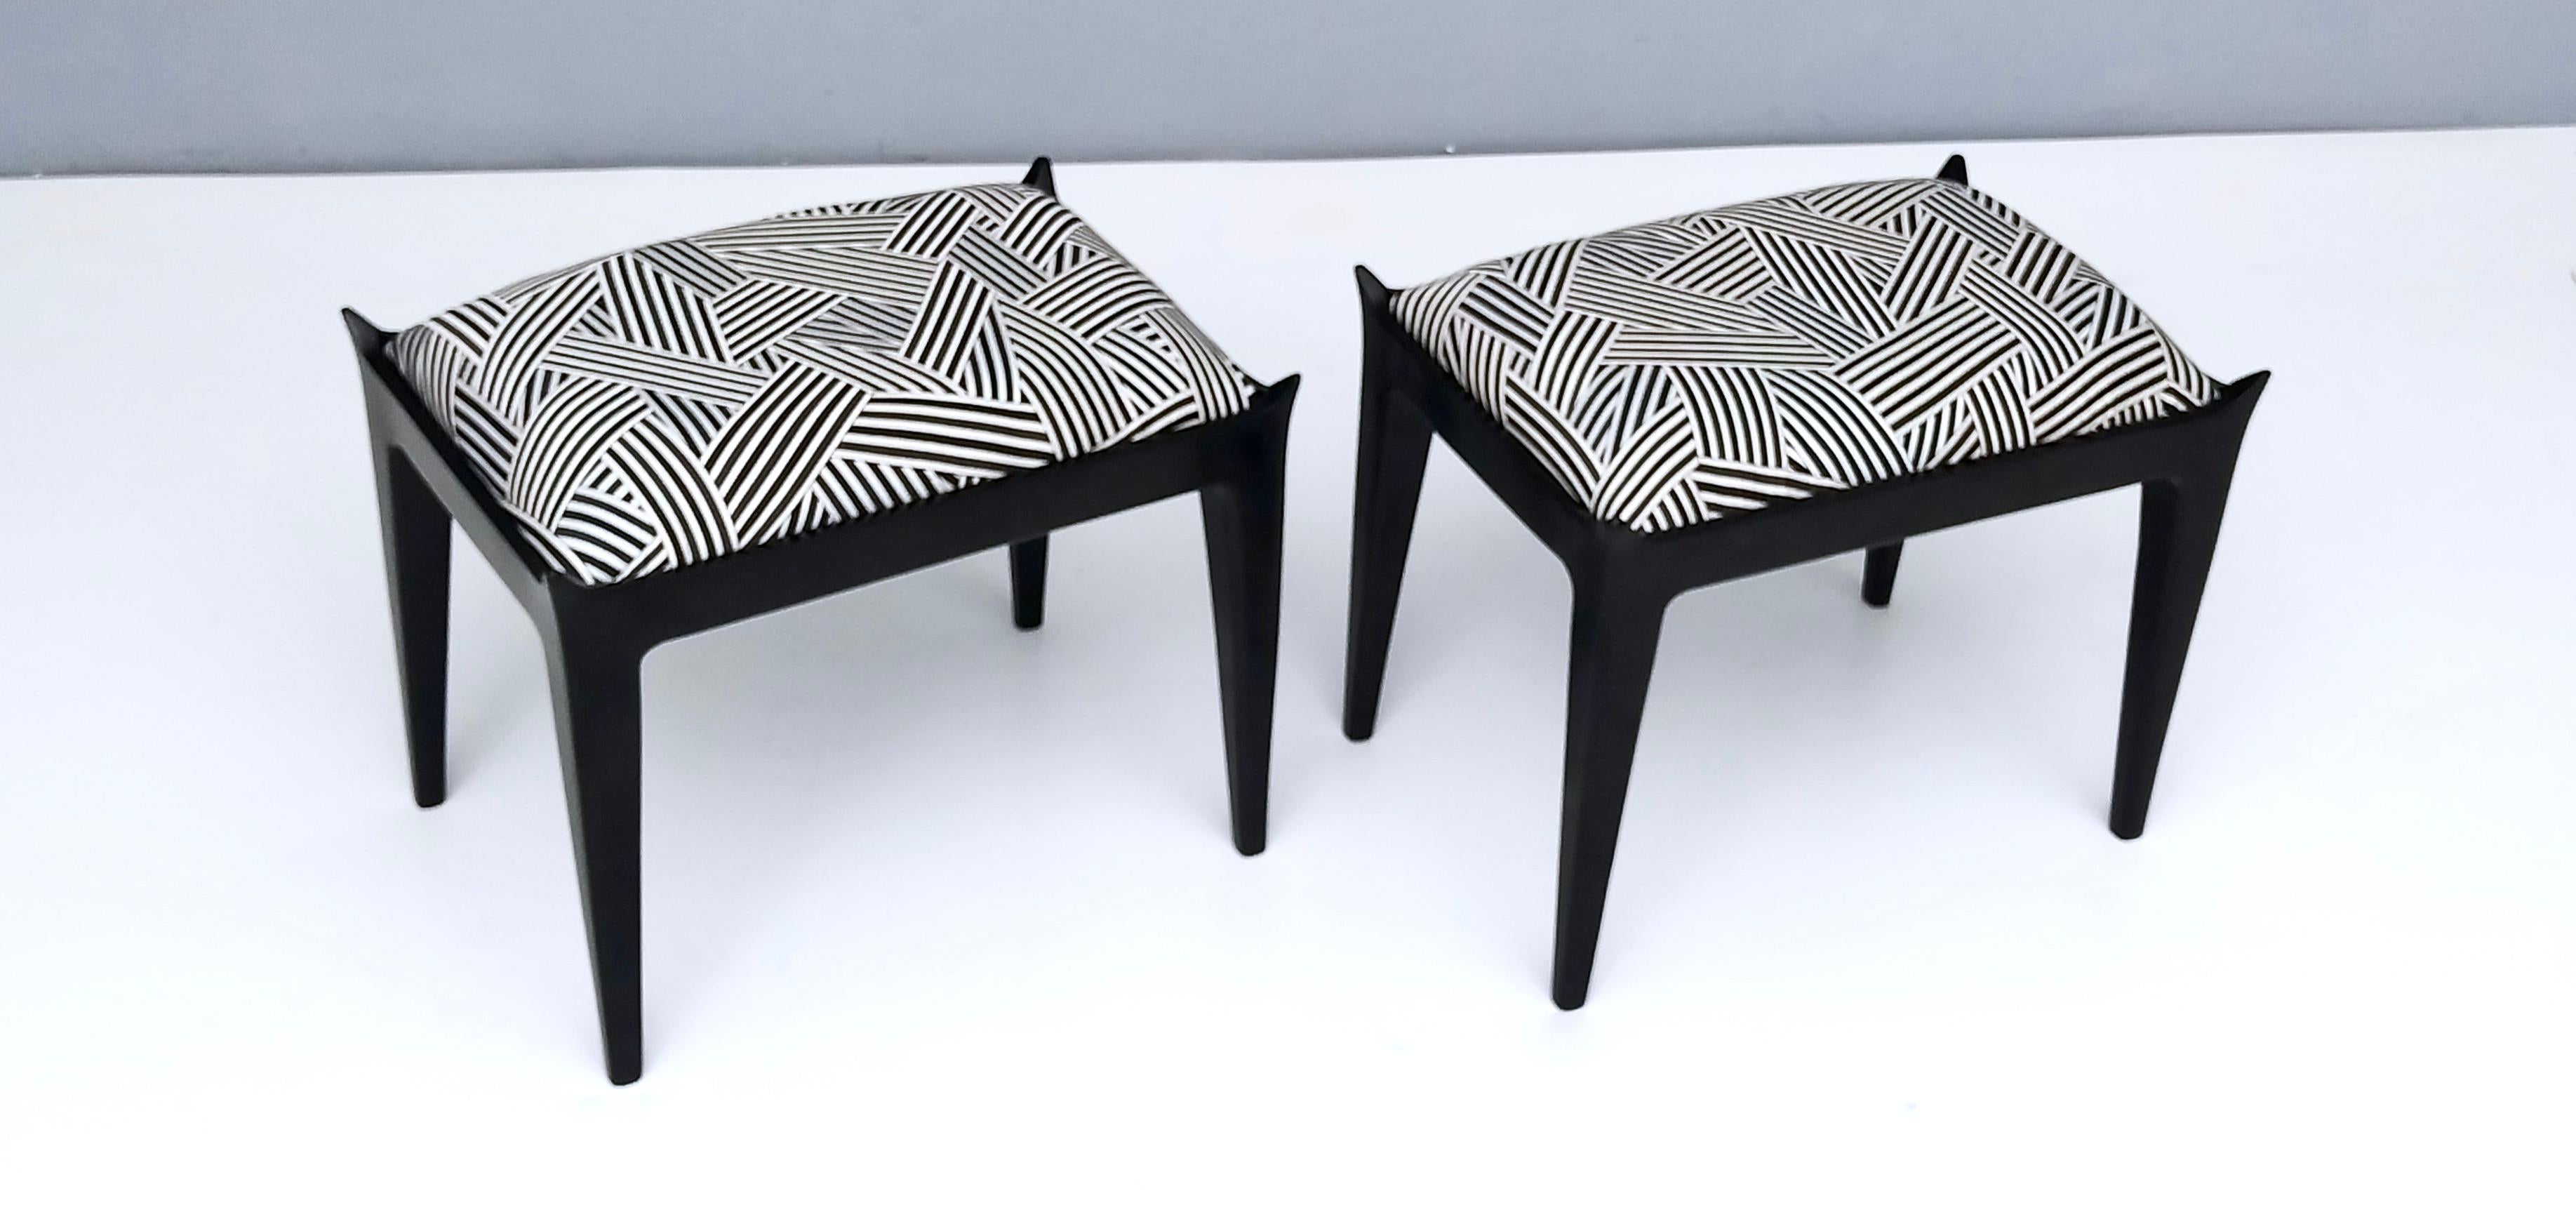 Ebonized Pair of Vintage Poufs Upholstered in Black and White Fabric by Dedar For Sale